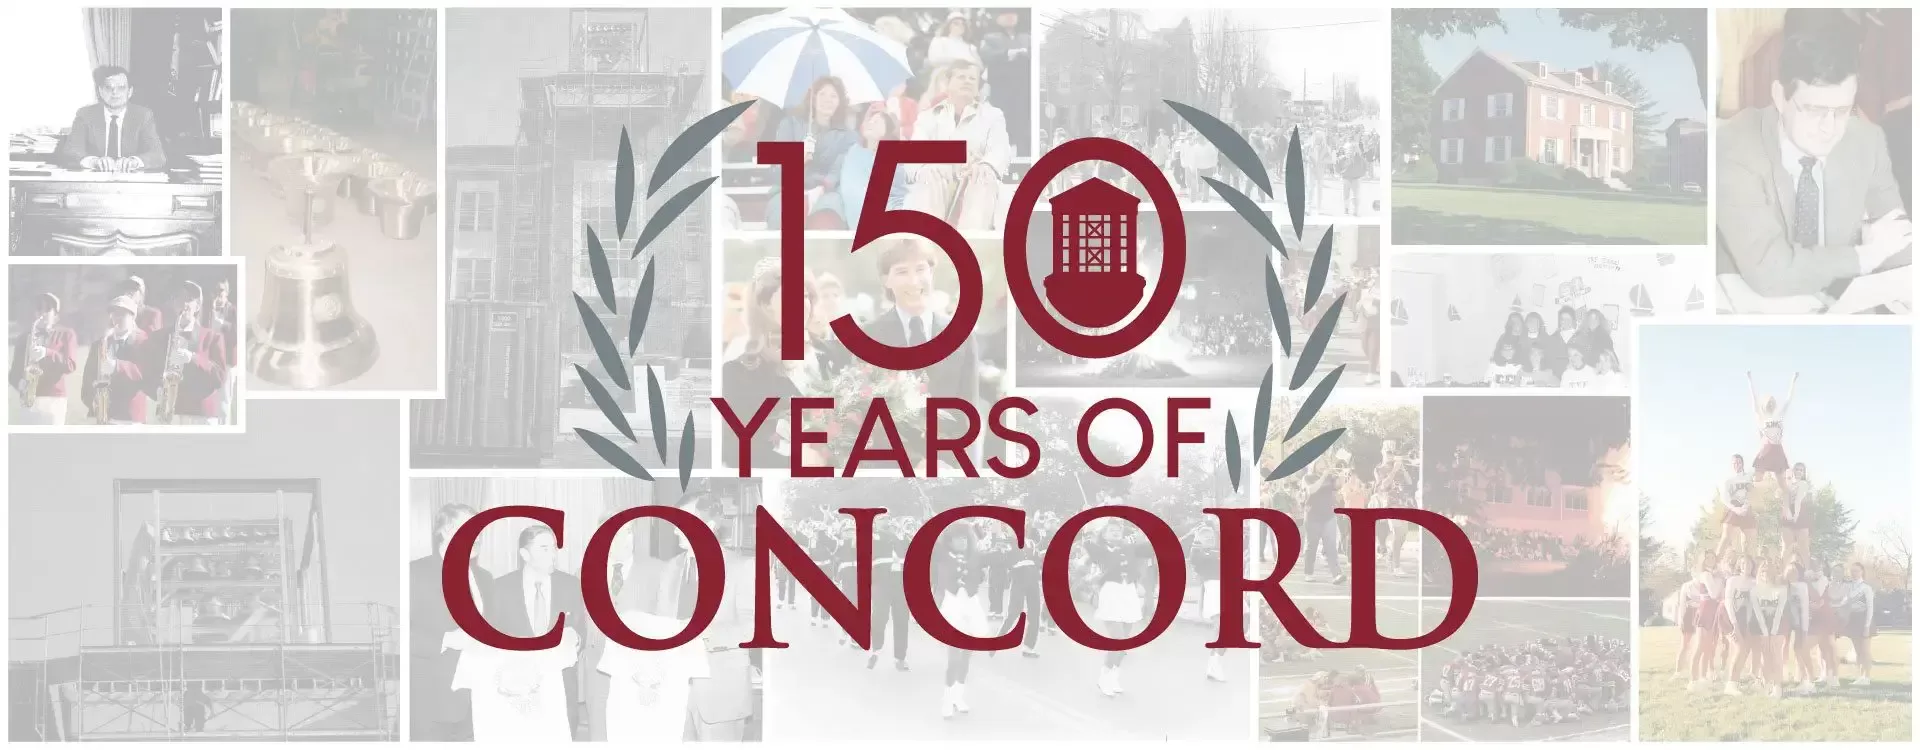 Celebrating 150 years of Concord